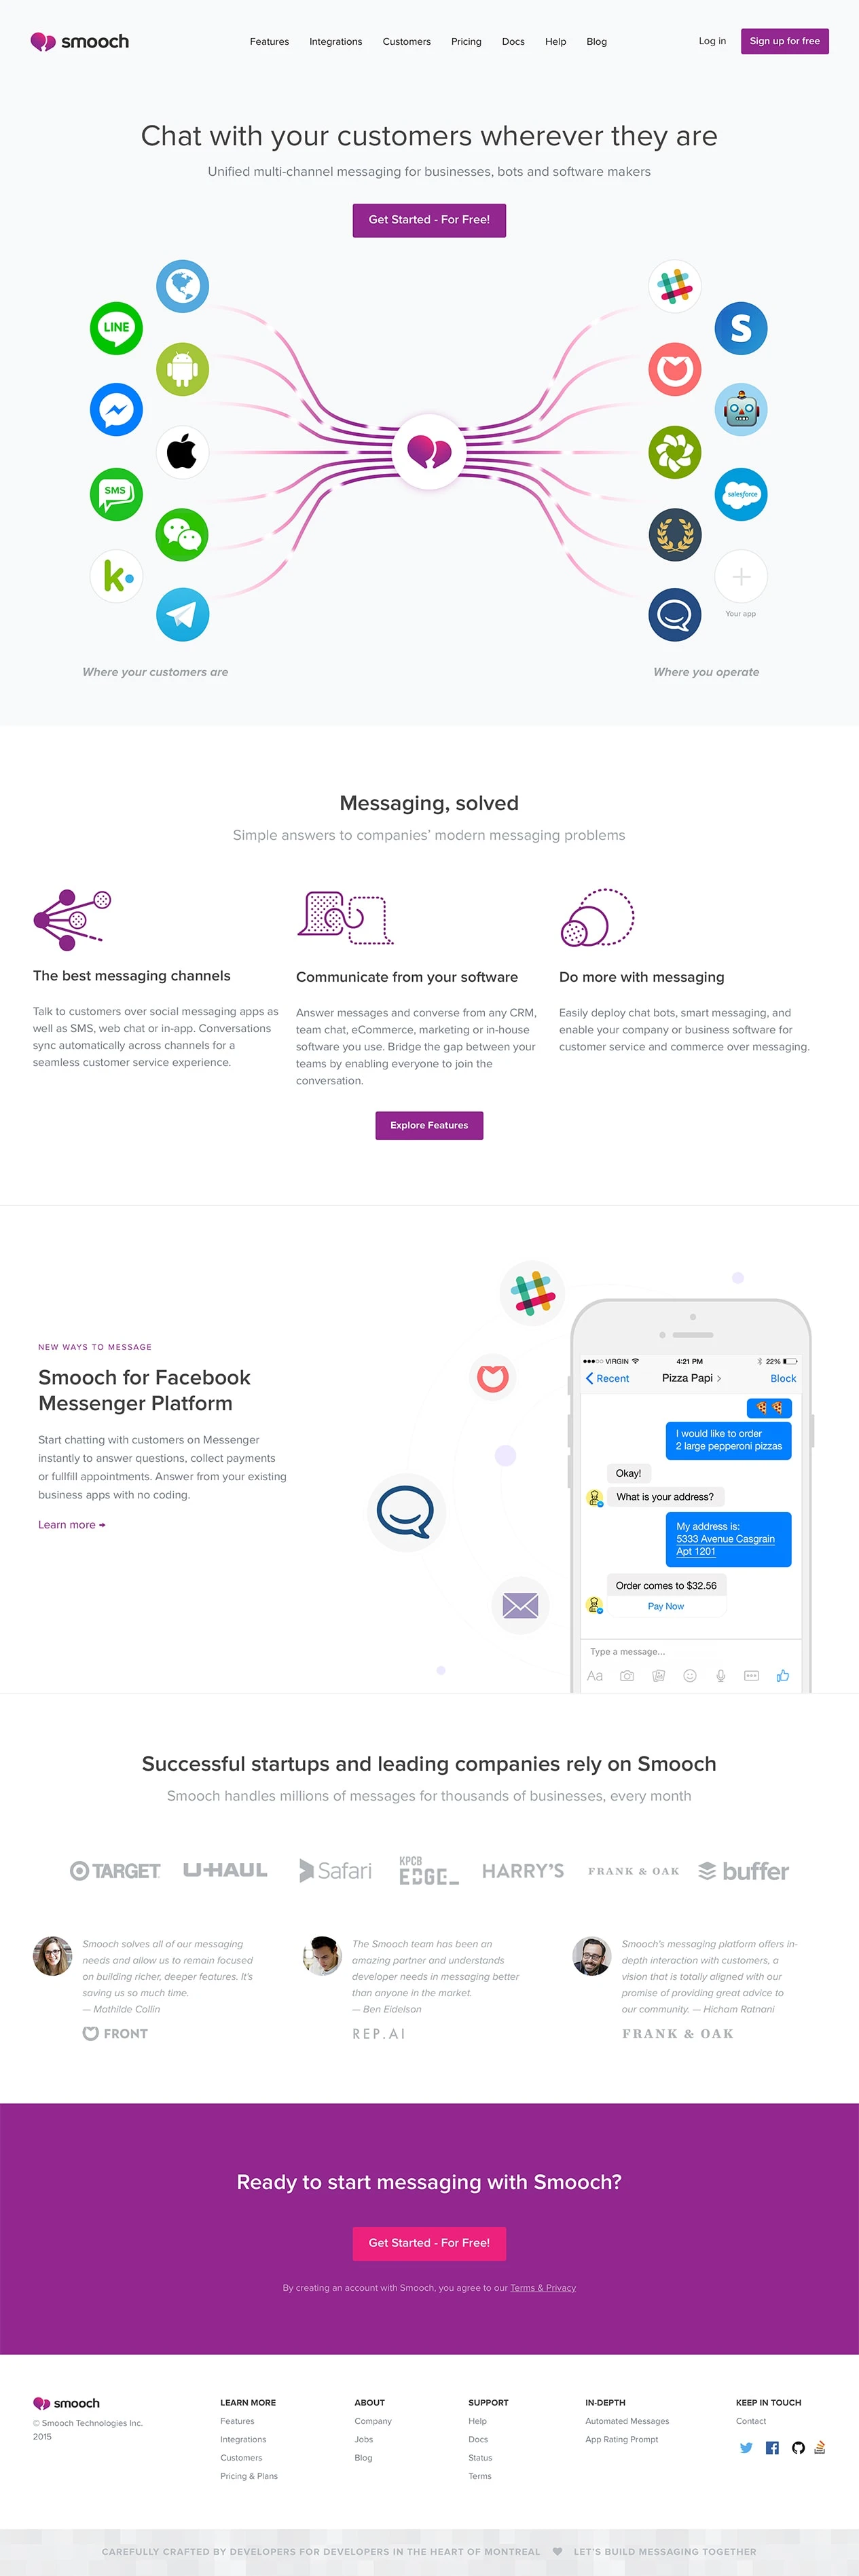 Smooch Landing Page Example: Start messaging your customers today. Everything you need to chat with customer wherever they are and grow your business